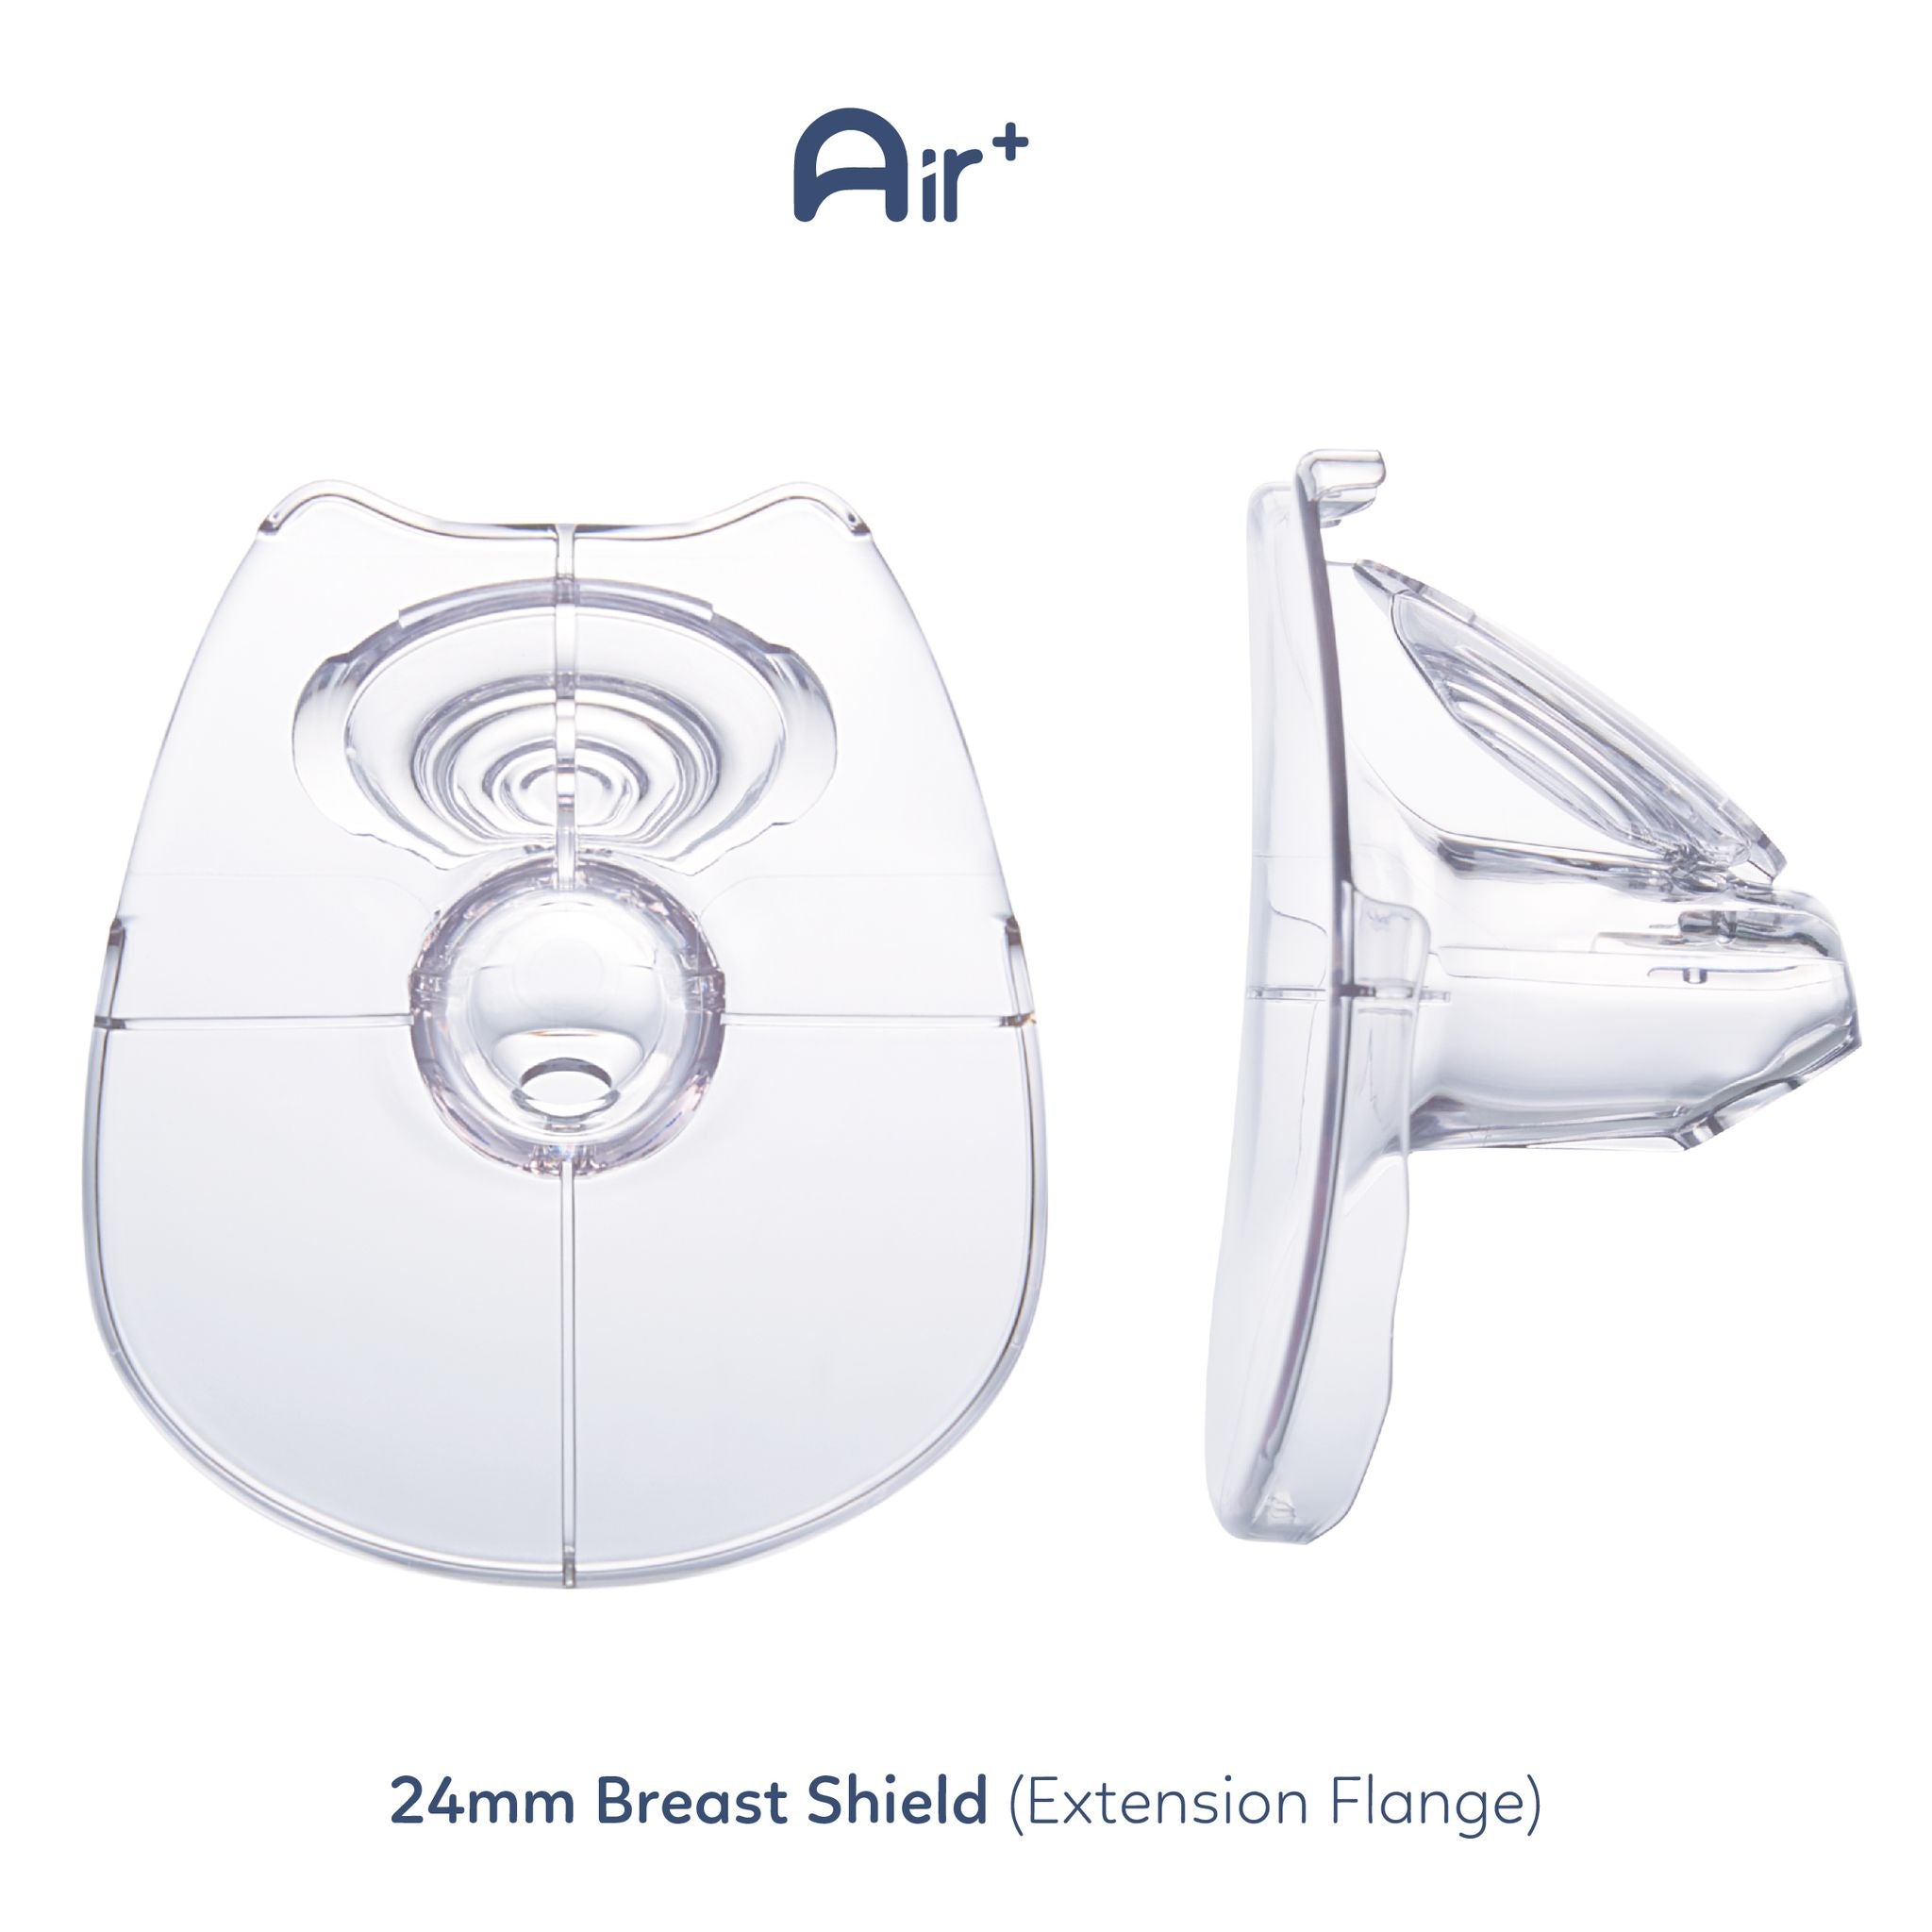 Breast Shield 24mm extension flange